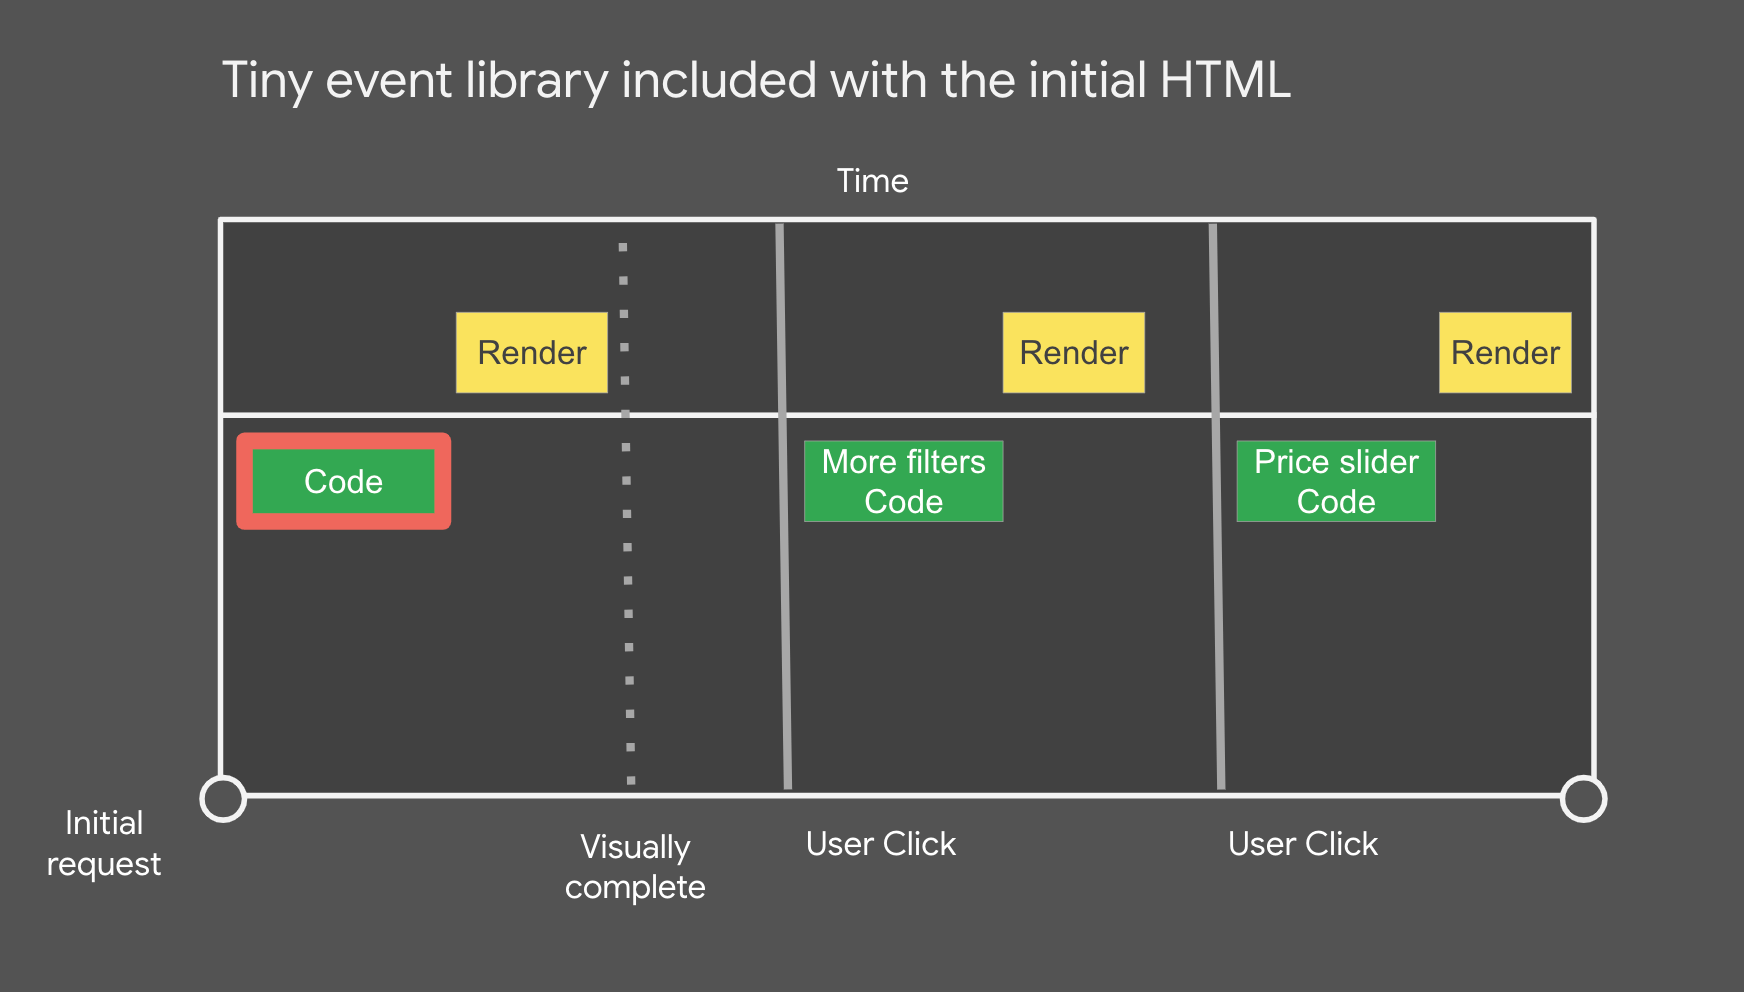 Tiny event library included with the initial HTML